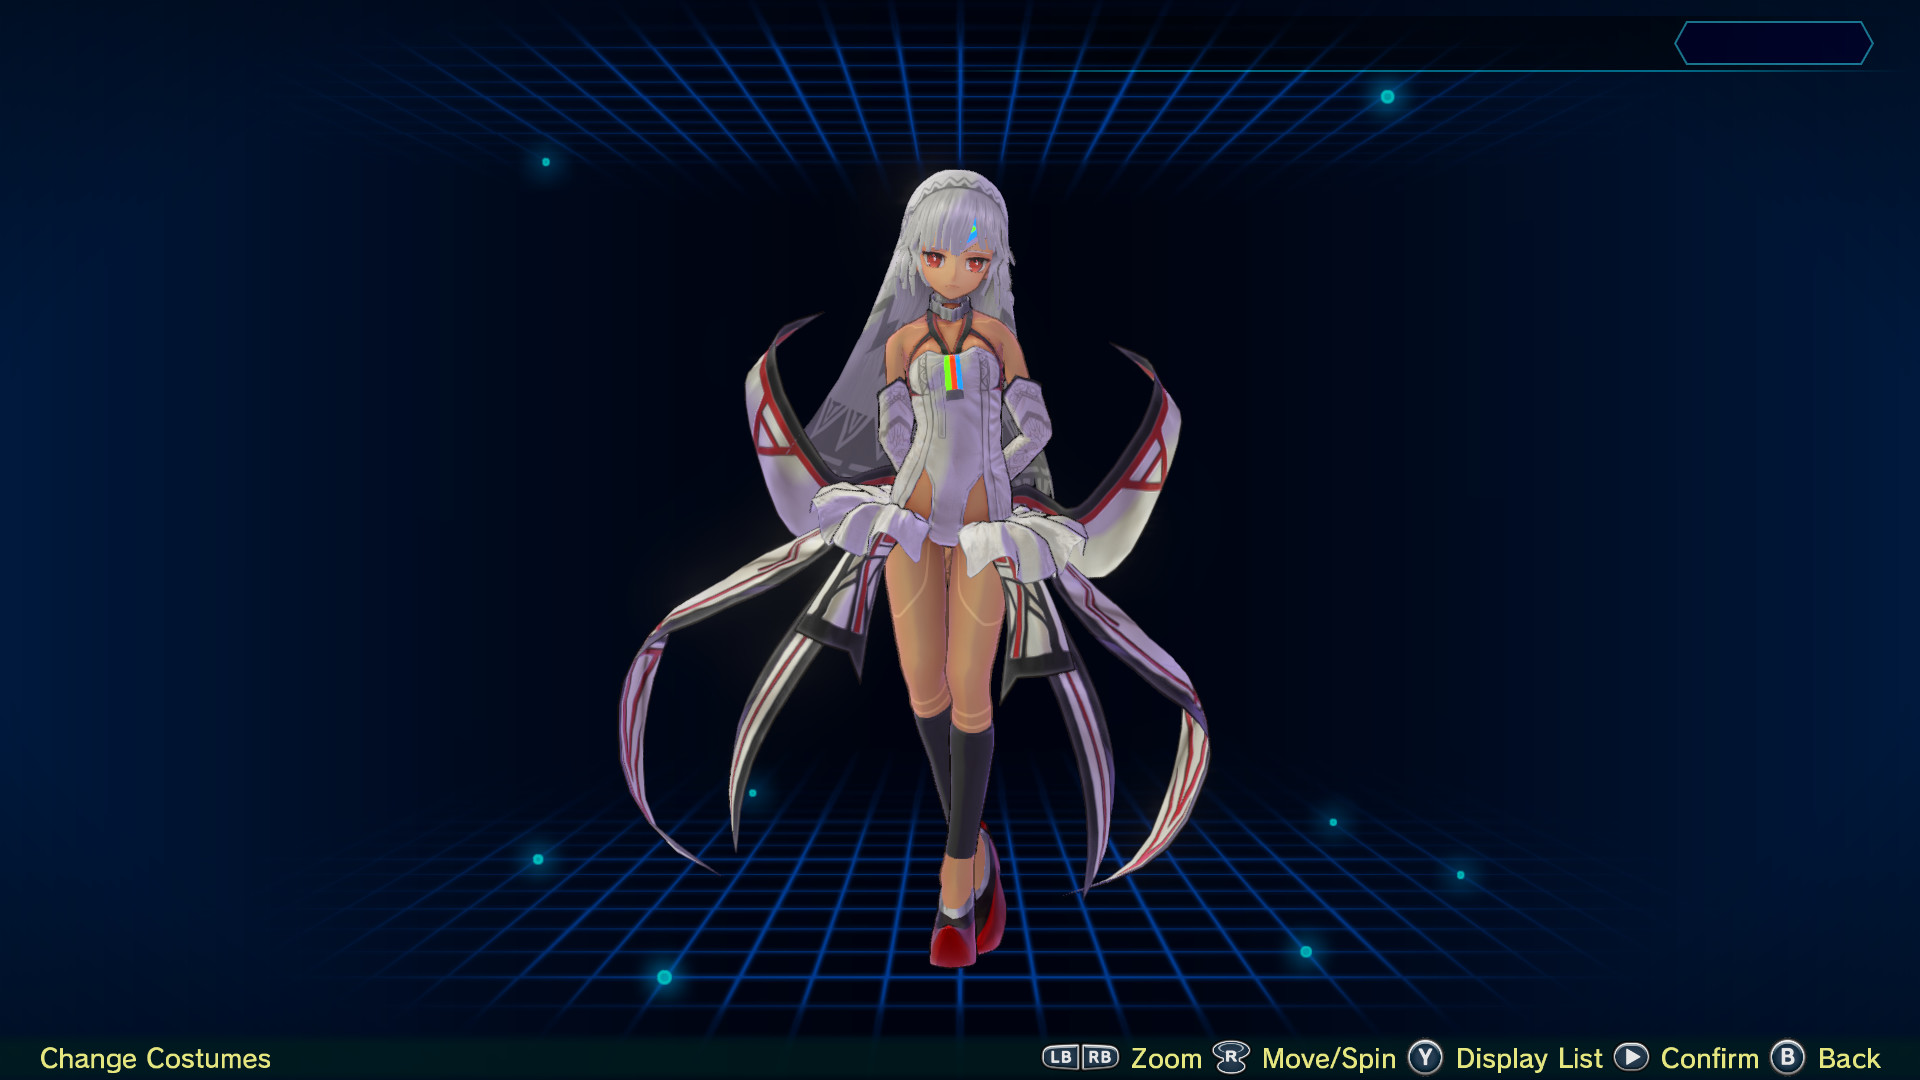 Fate/EXTELLA LINK - Young Altera Featured Screenshot #1